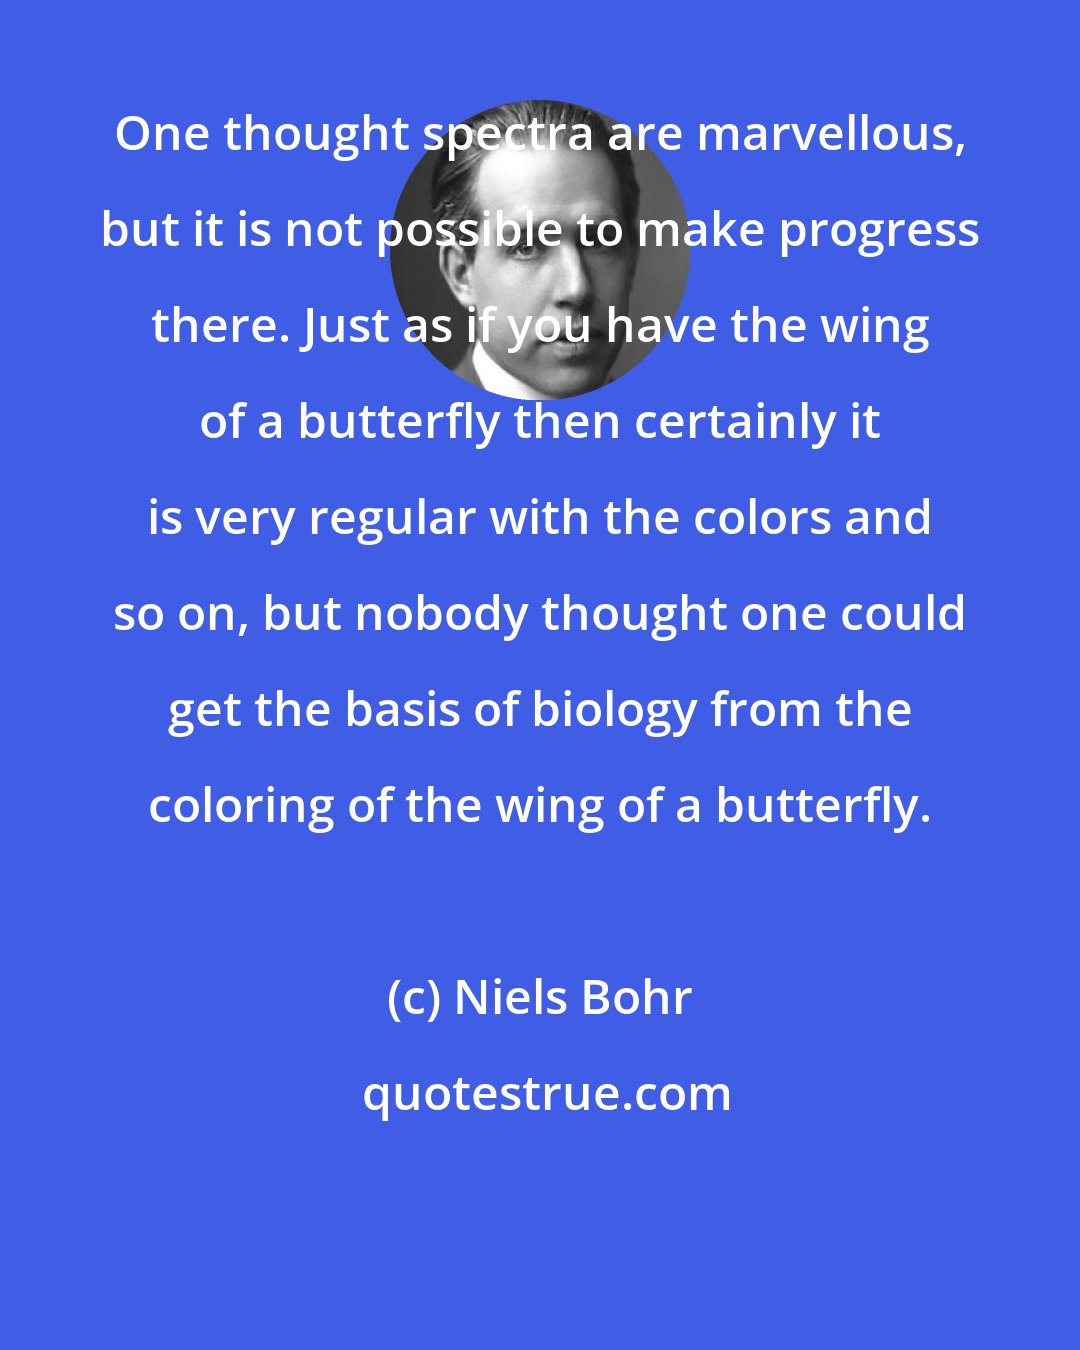 Niels Bohr: One thought spectra are marvellous, but it is not possible to make progress there. Just as if you have the wing of a butterfly then certainly it is very regular with the colors and so on, but nobody thought one could get the basis of biology from the coloring of the wing of a butterfly.